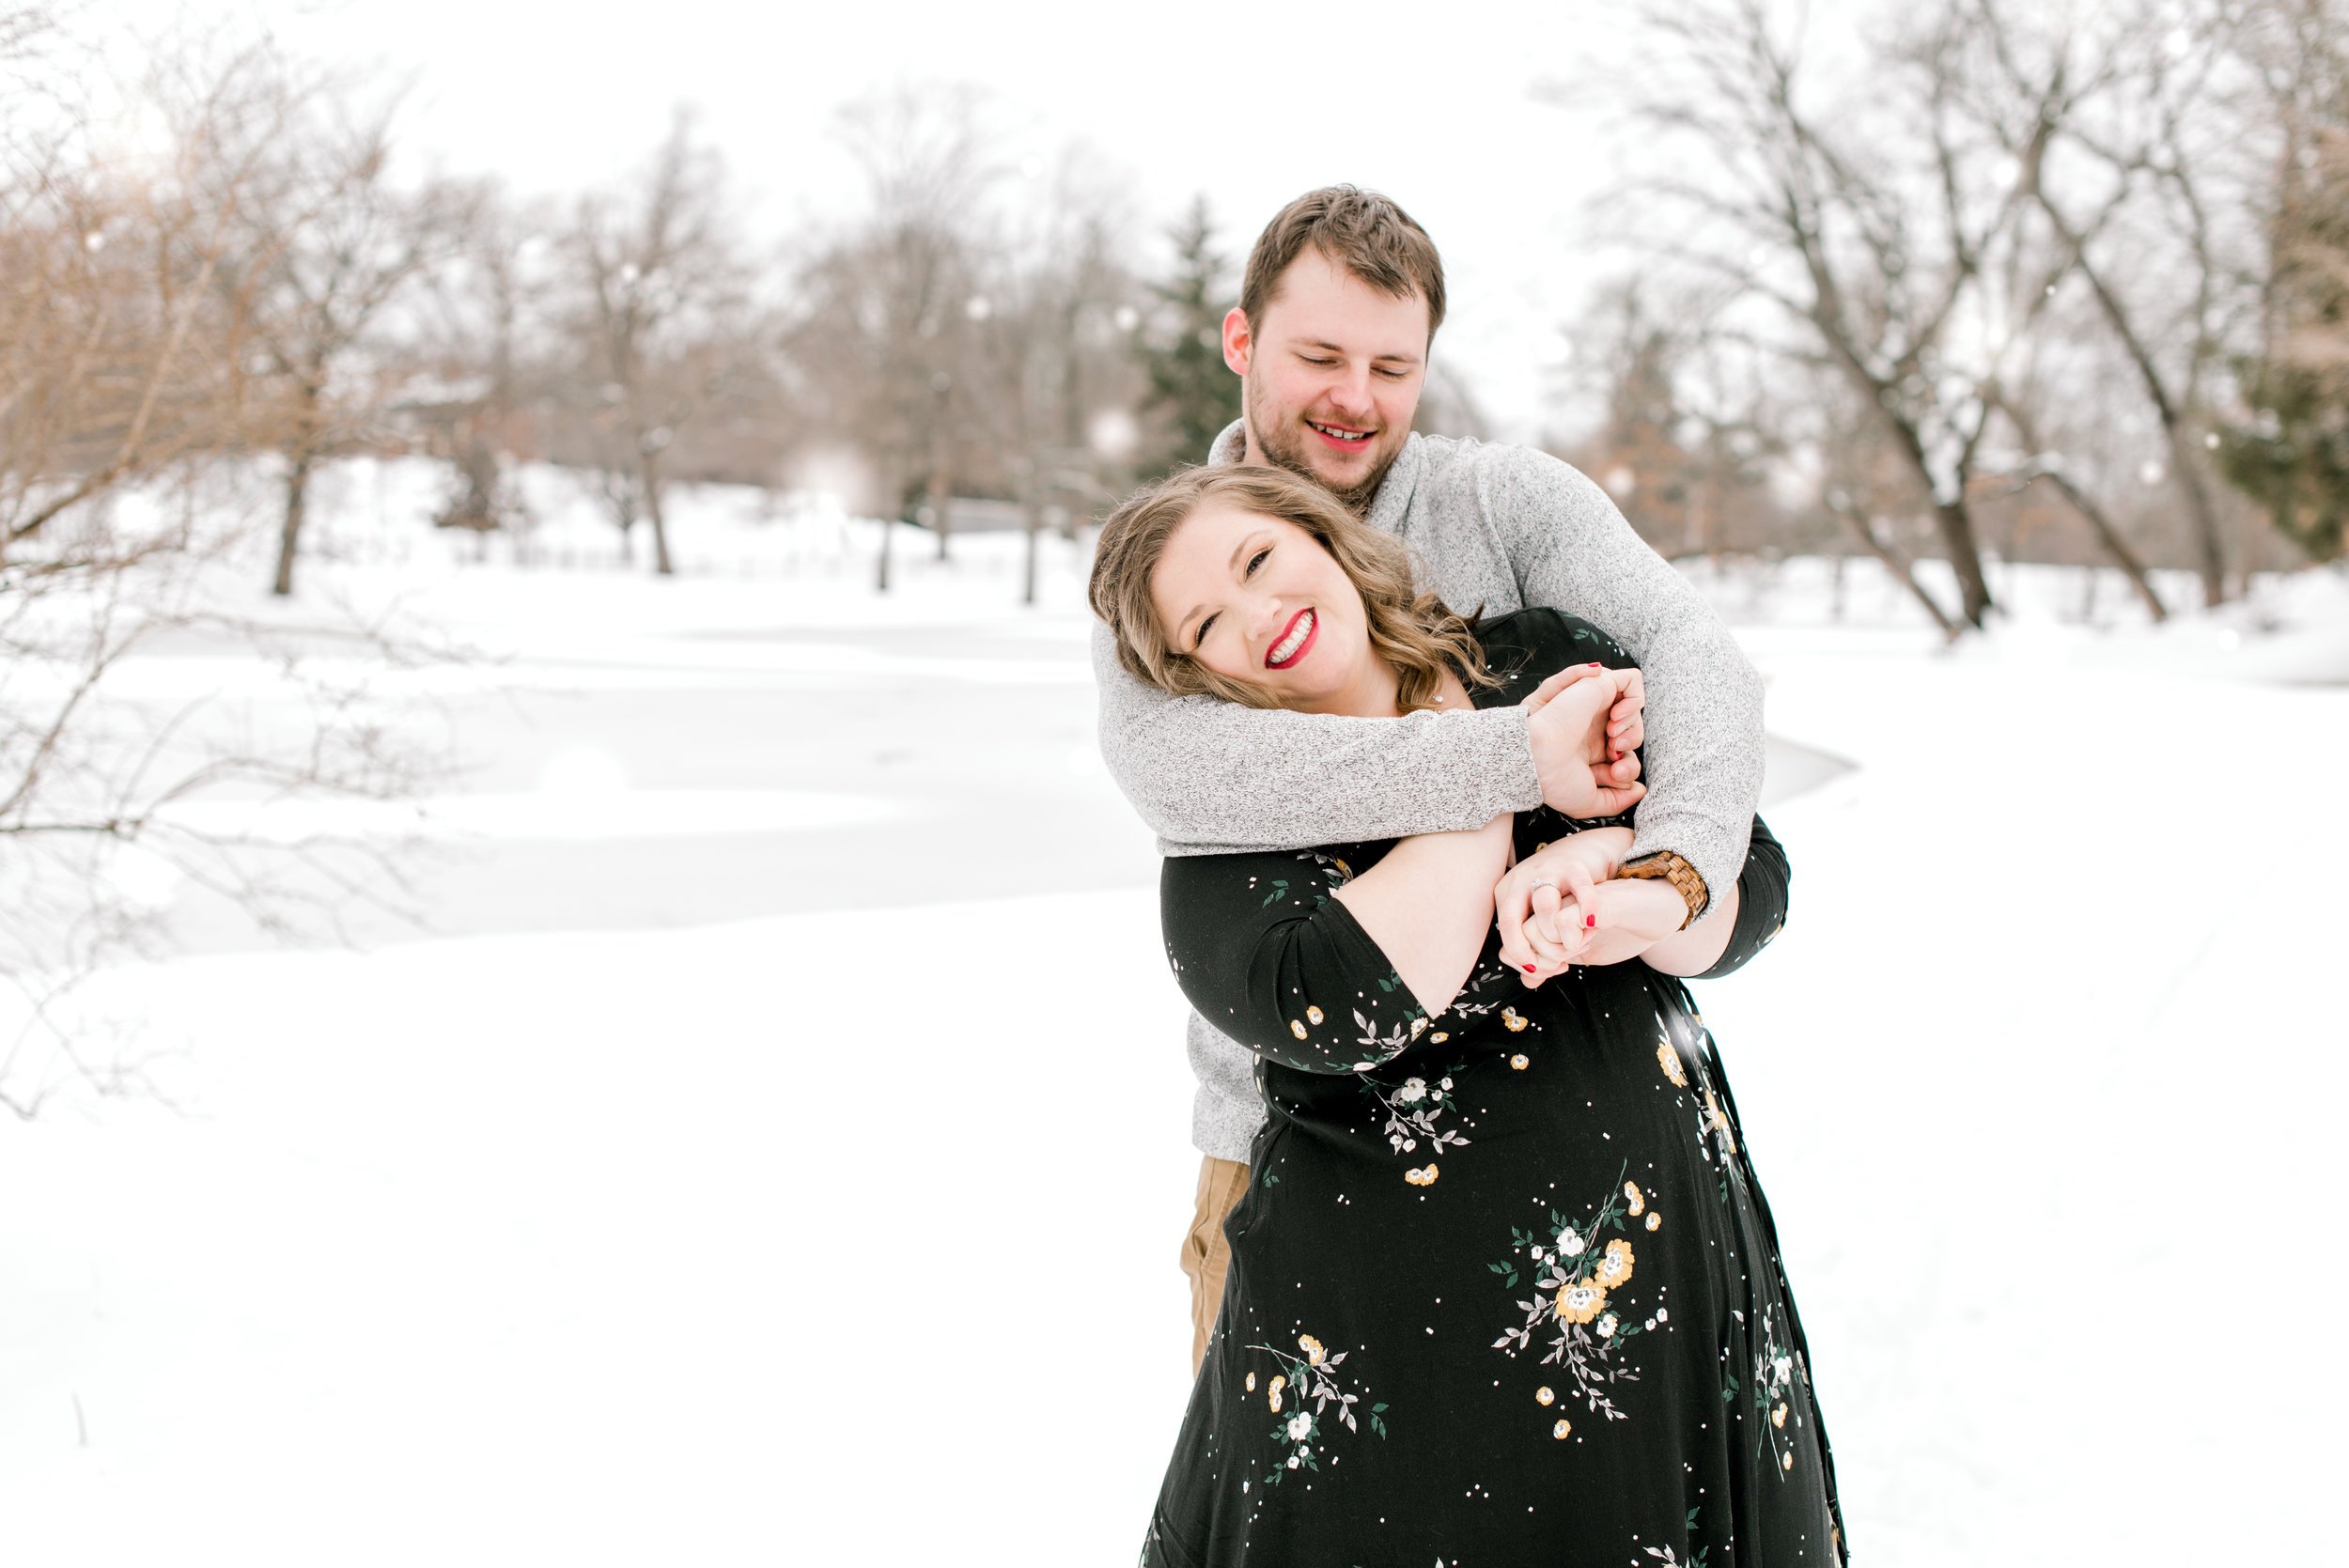 1march2019-roger-williams-park-snow-engagement-session-10.jpg